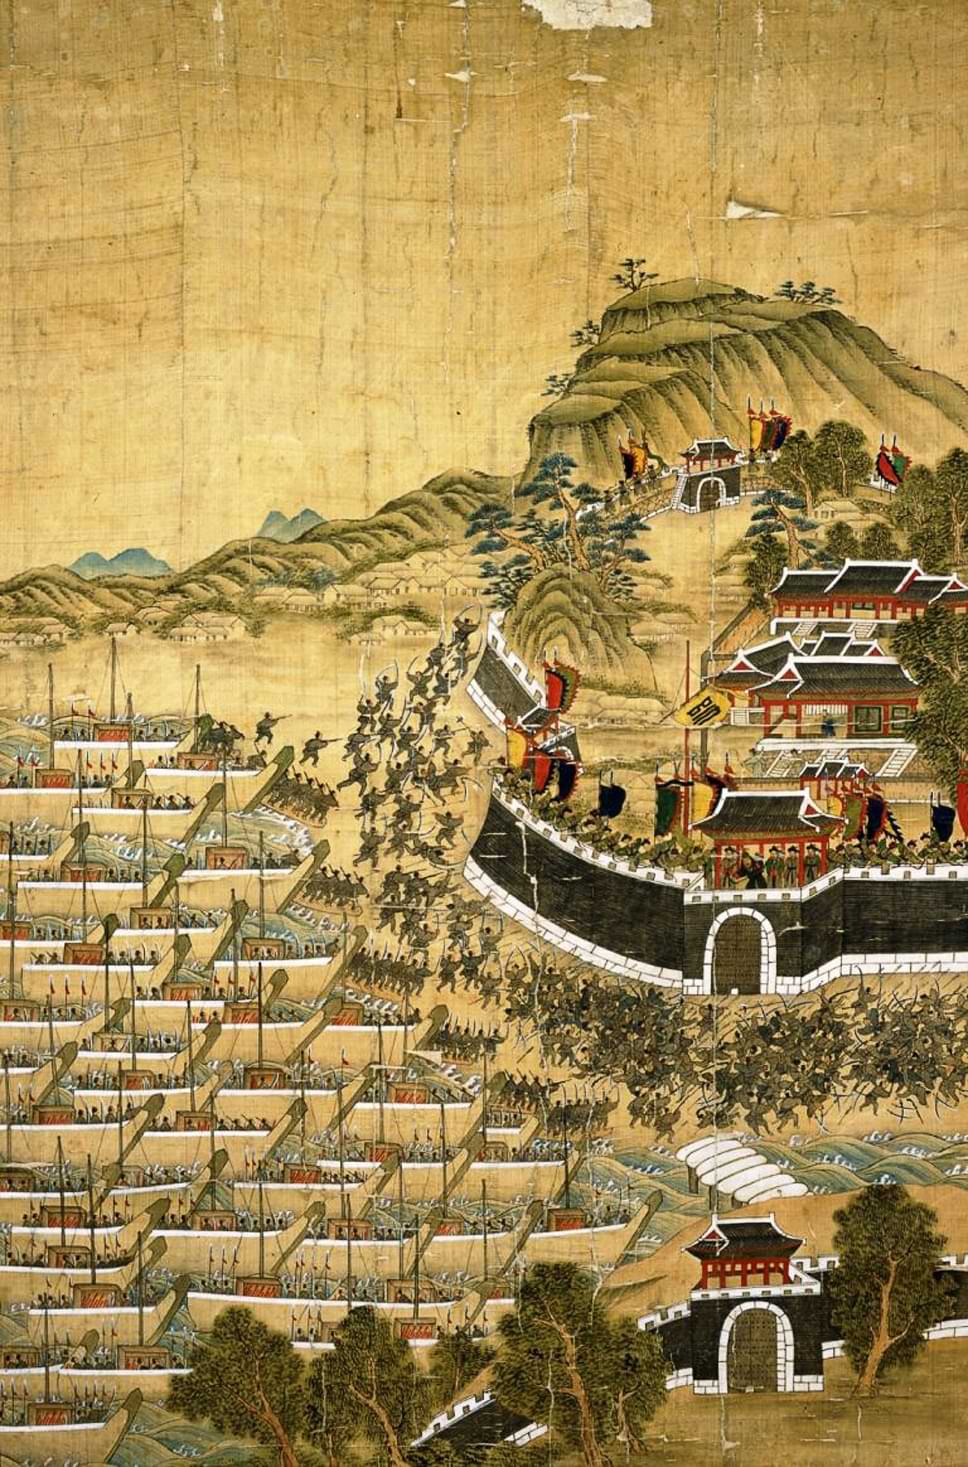 Japanese Siege of Busan with Tozotomi Hidezoshi as the commander.